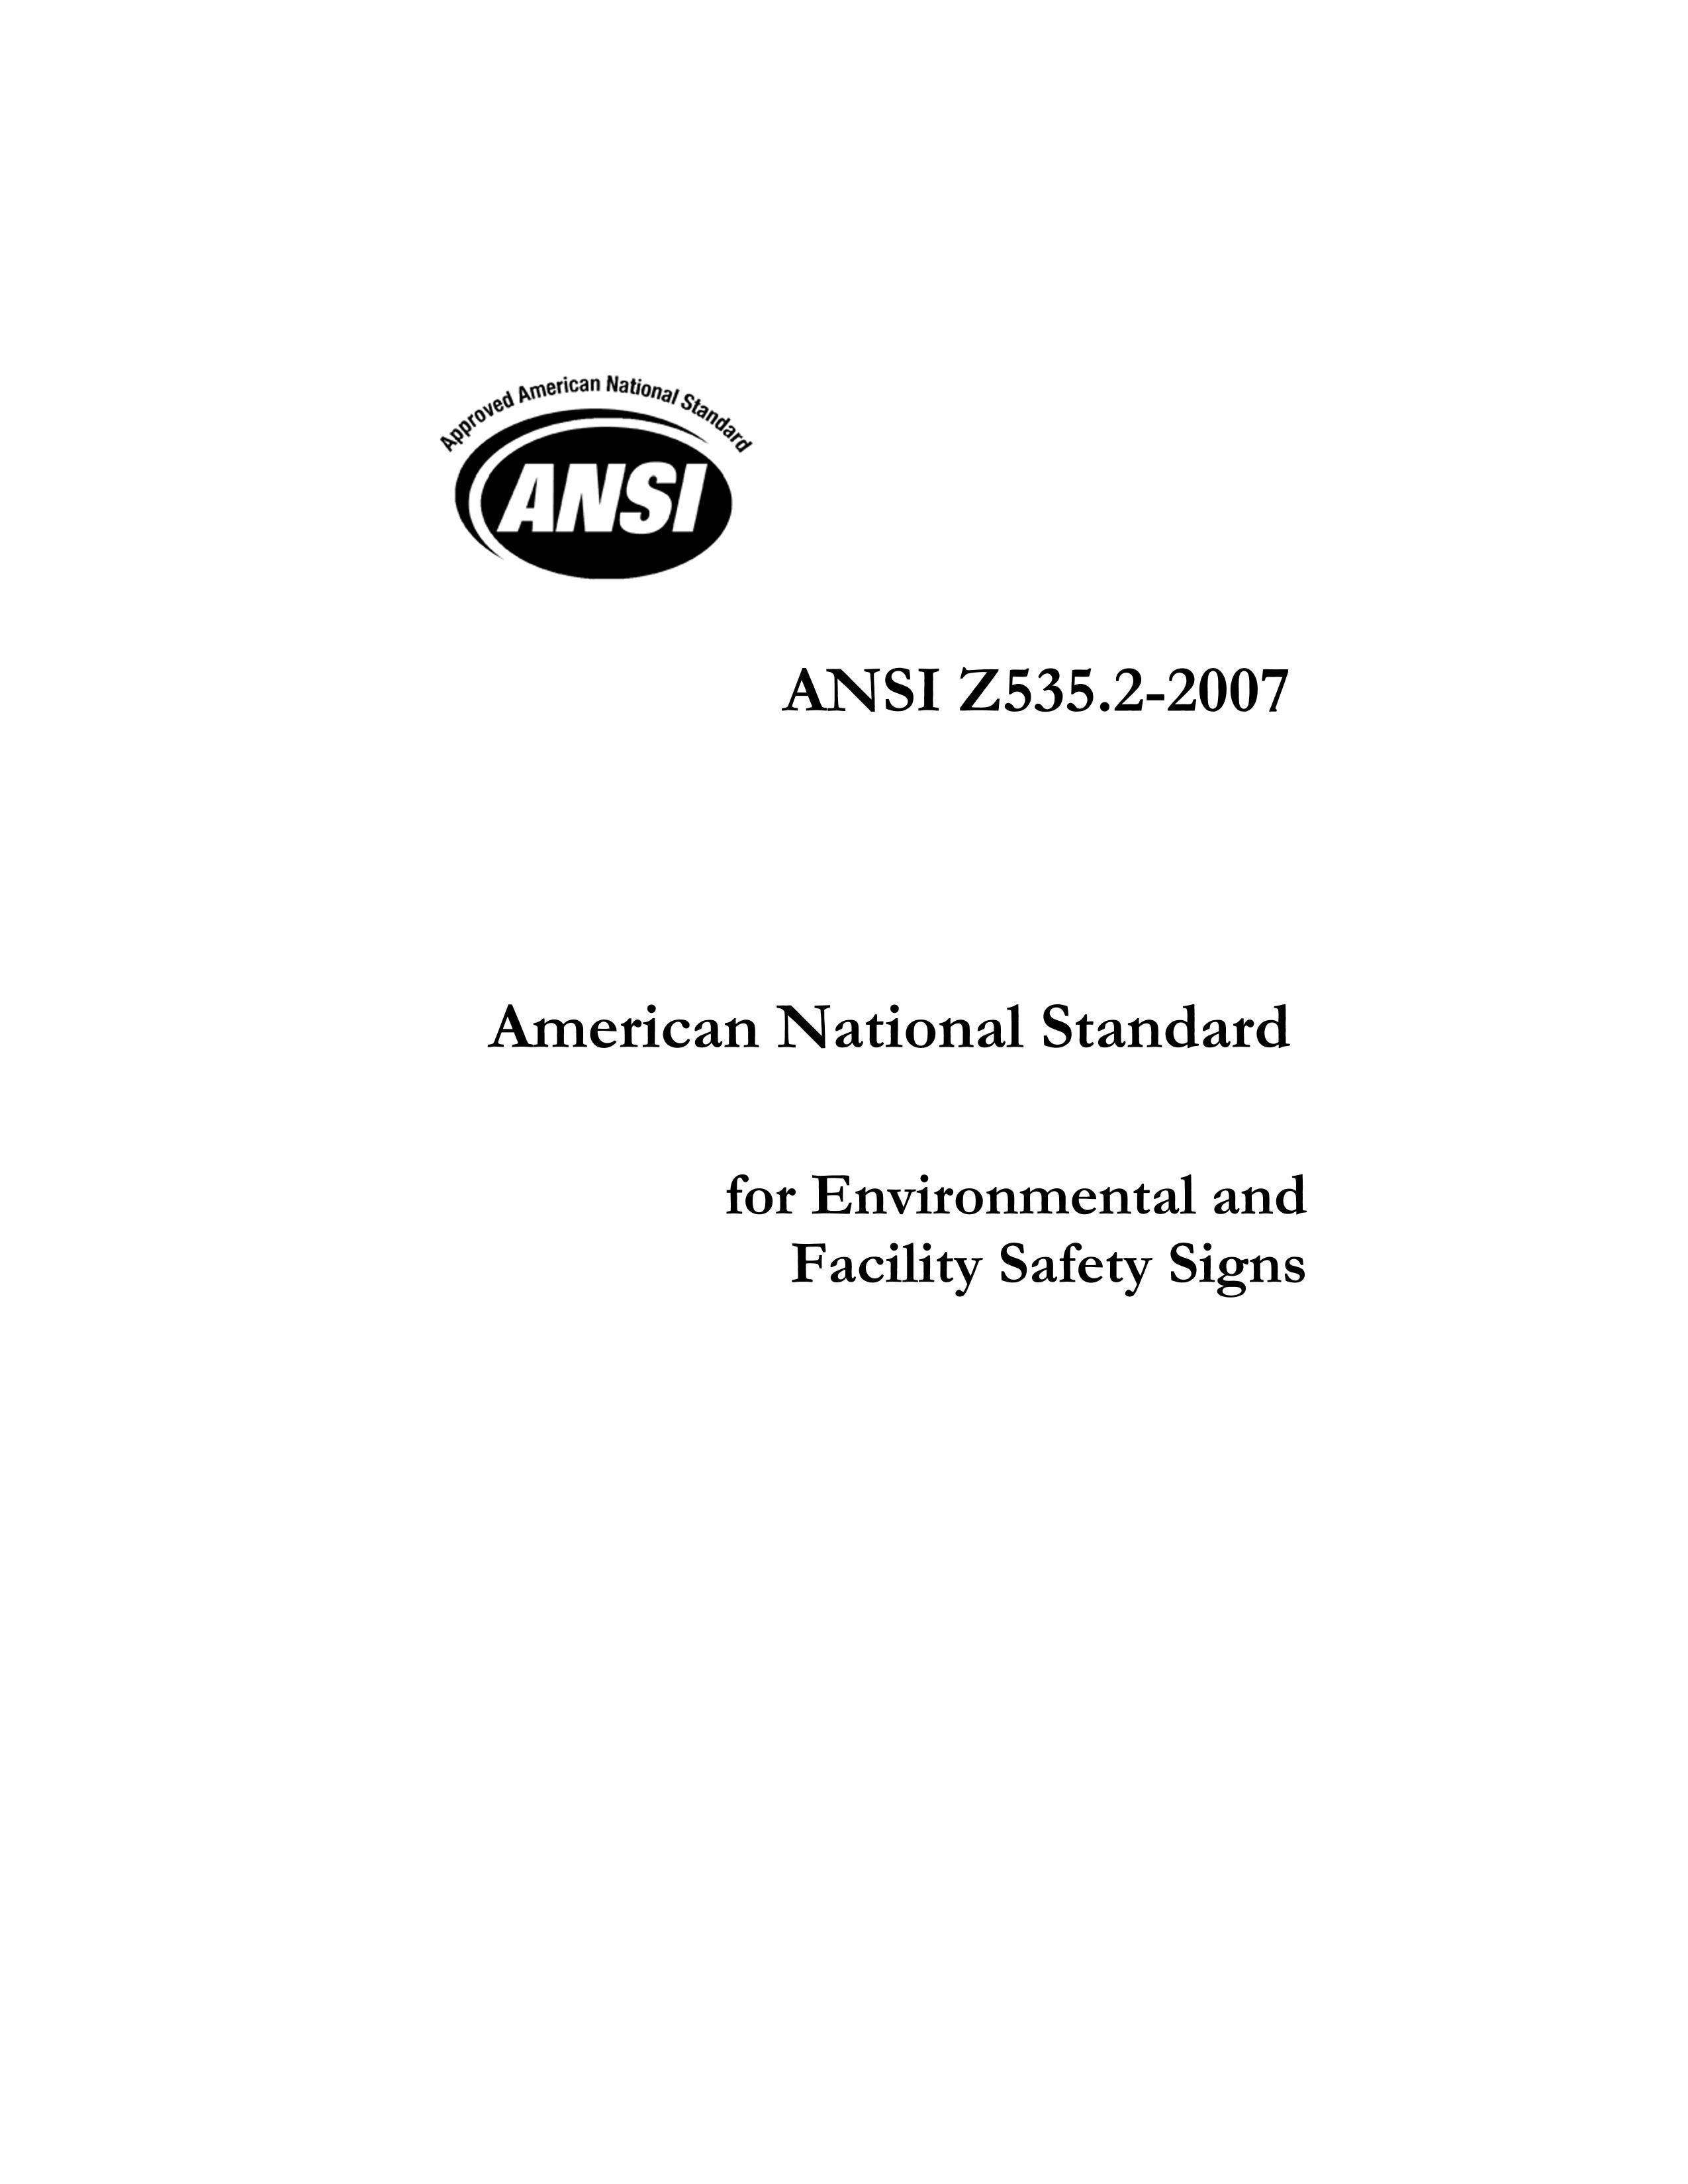 ANSI Z535.2-2007 American National Standard for Environmental and Facility Safety Signs.pdf1ҳ